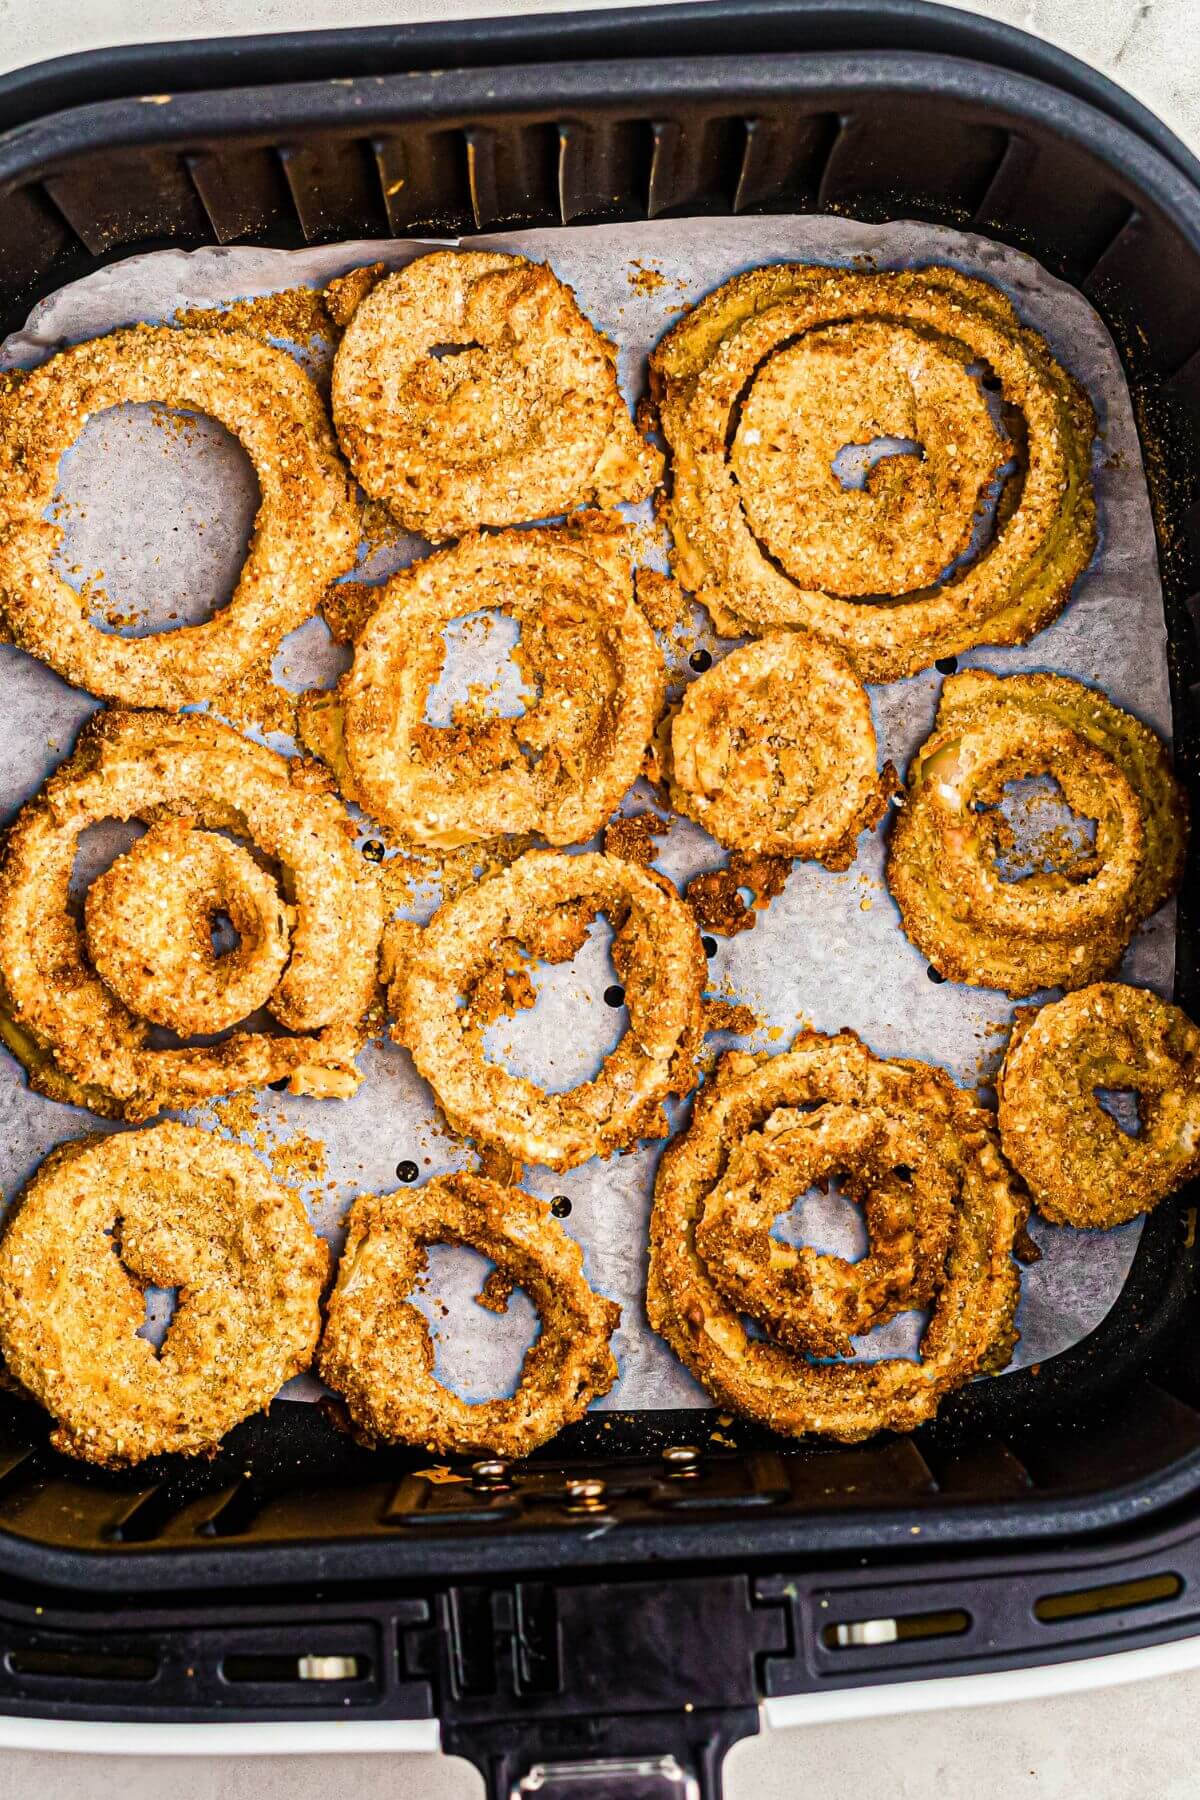 Onion rings on parchment paper in air fryer basket.